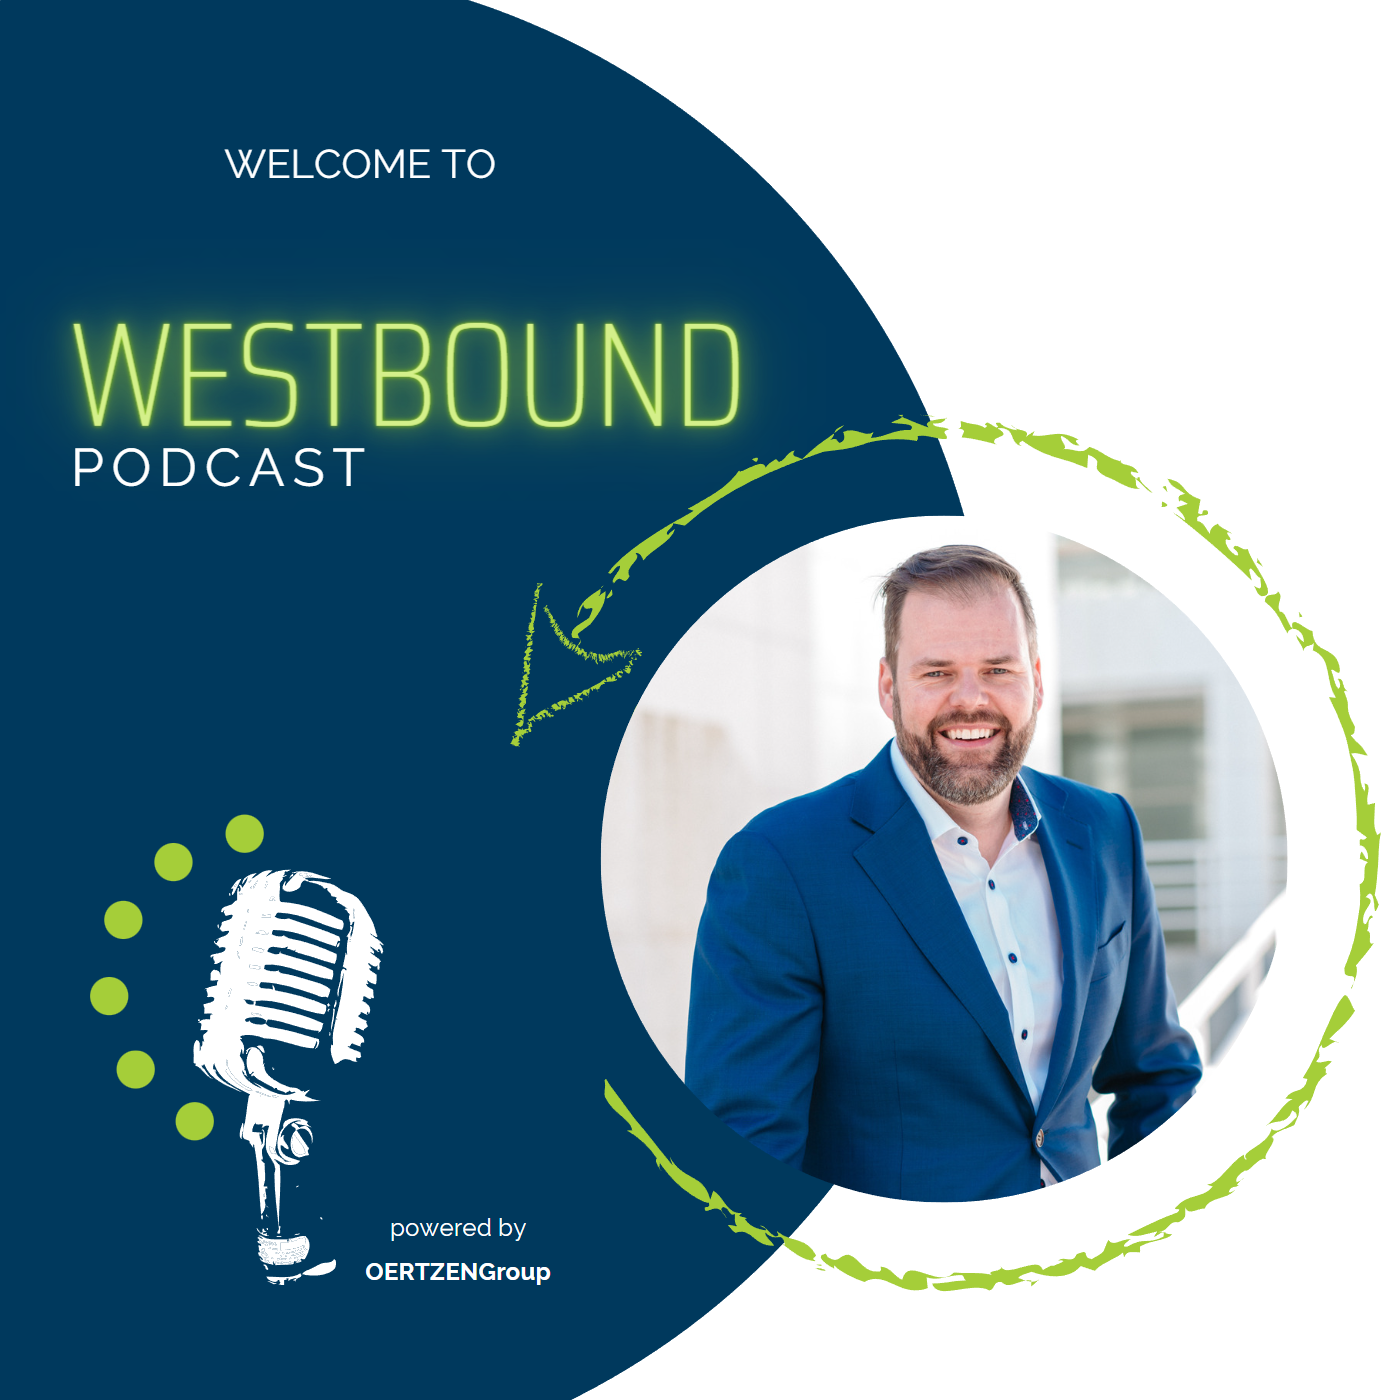 Welcome to WESTBOUND Podcast